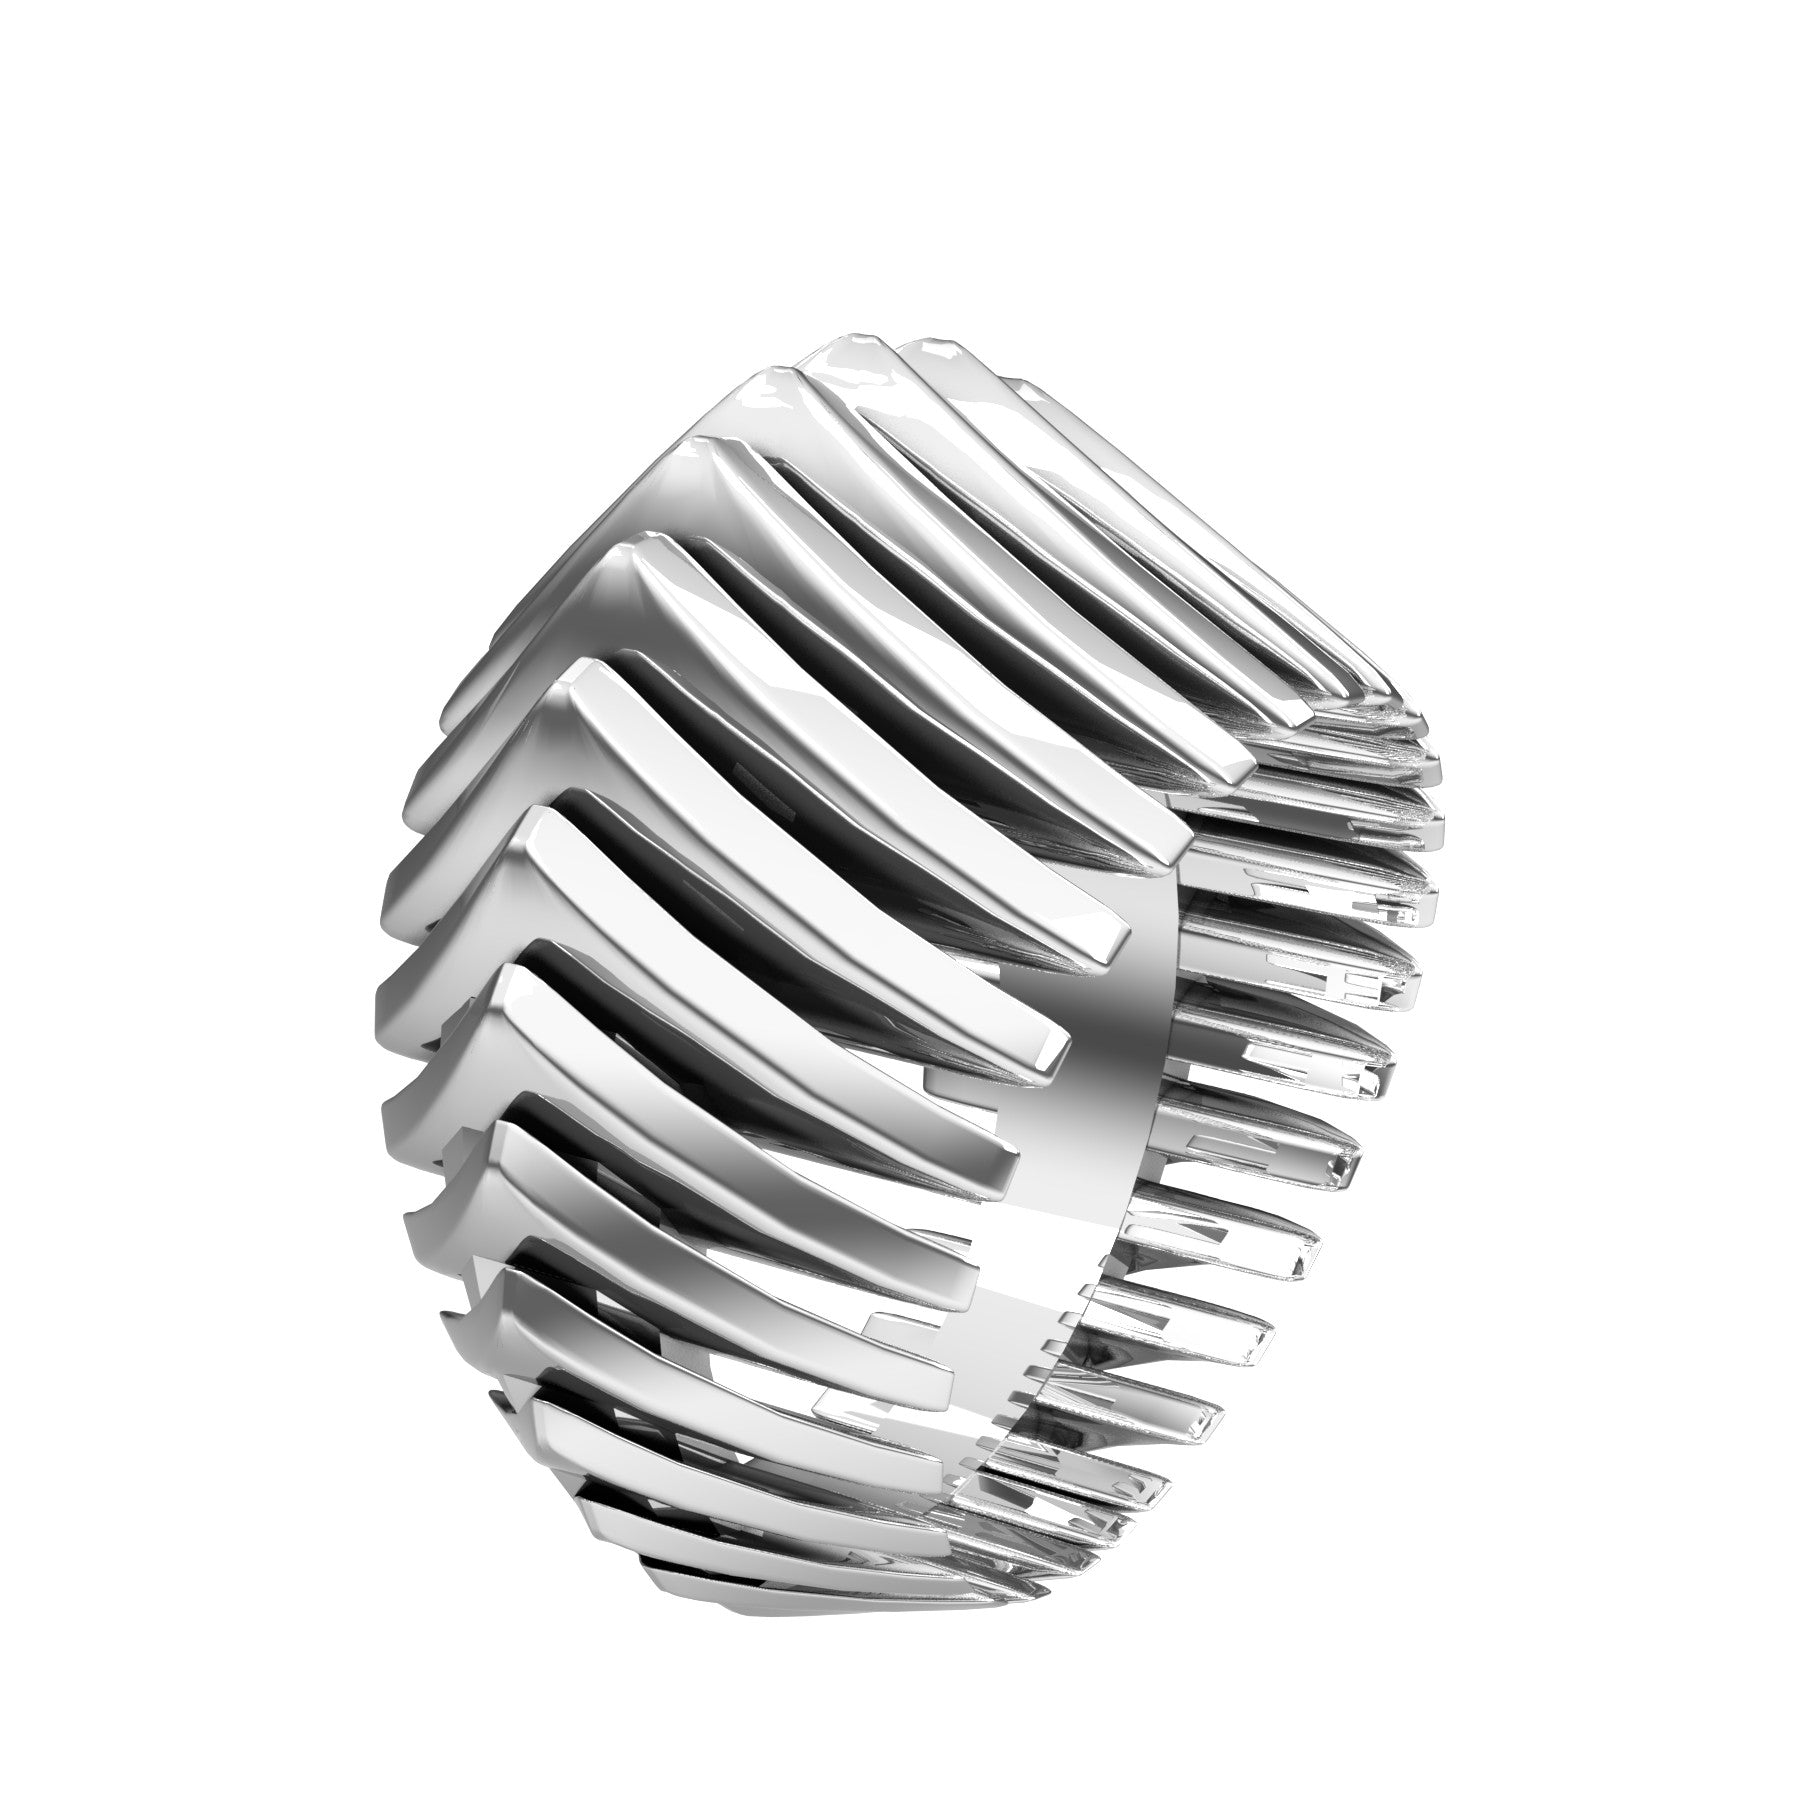 mekkano ring, 18 K white gold, weight about 15,3 g. (0.54 oz), width 15,6 mm max